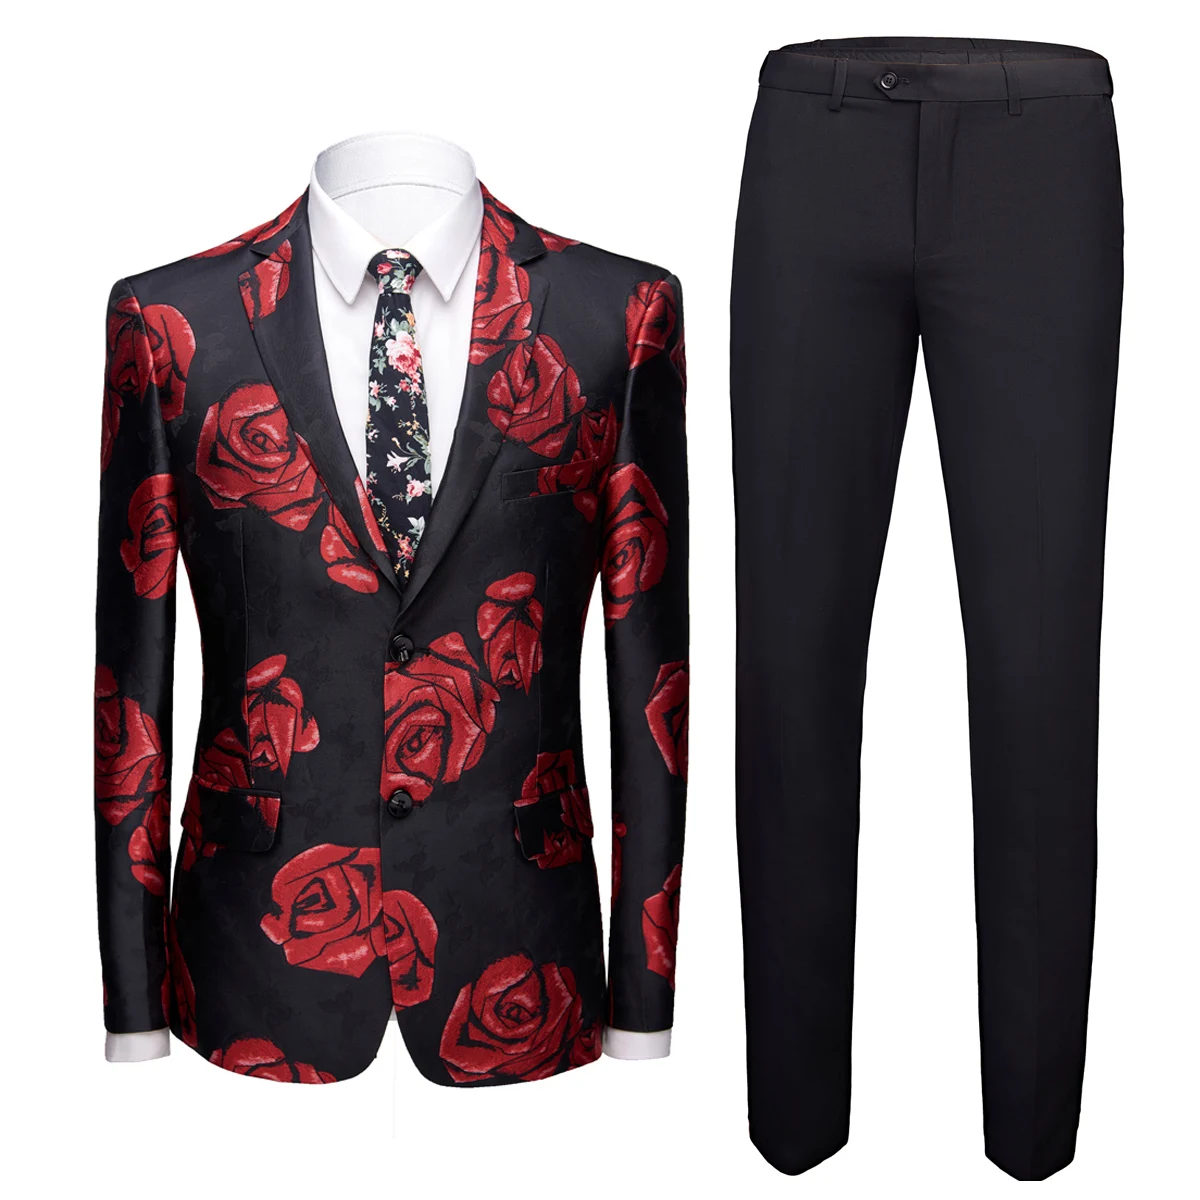 

Mens Shiny RED Rose Print 2 Pieces Set Coat Pant Designs Red Floral Pattern Suits Stage Singer Wedding Groom Tuxedo Costume